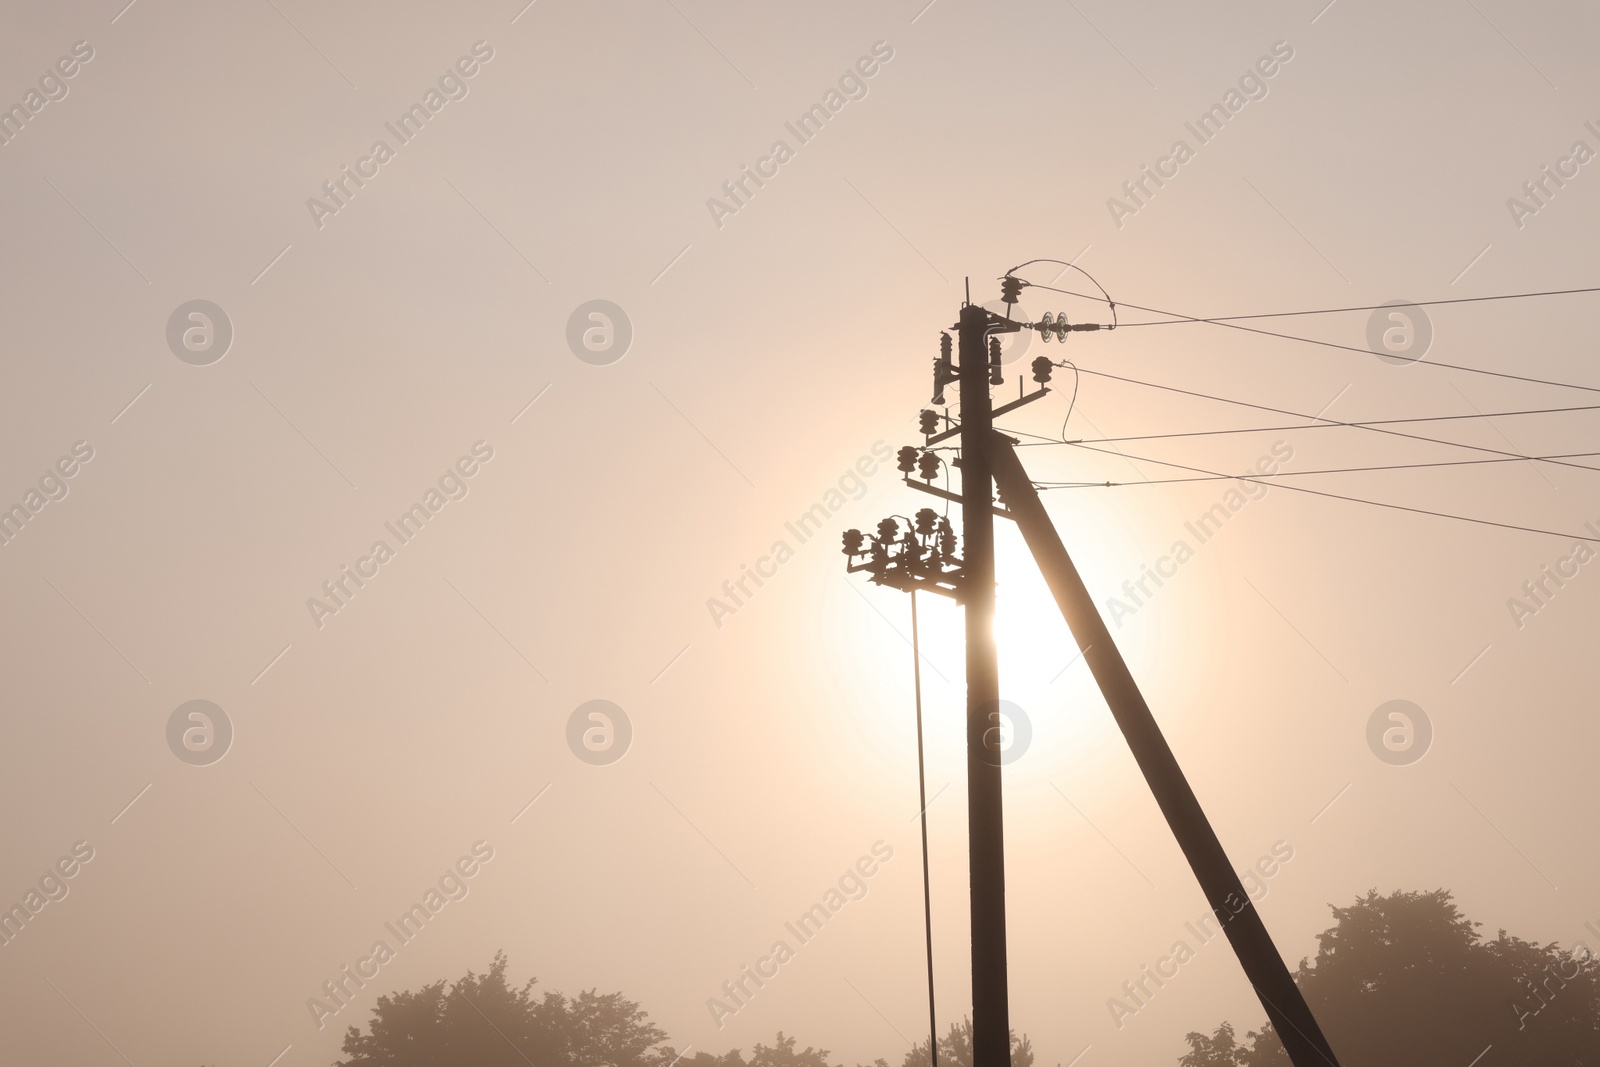 Photo of Utility pole with electric cables outdoors on summer day. Space for text